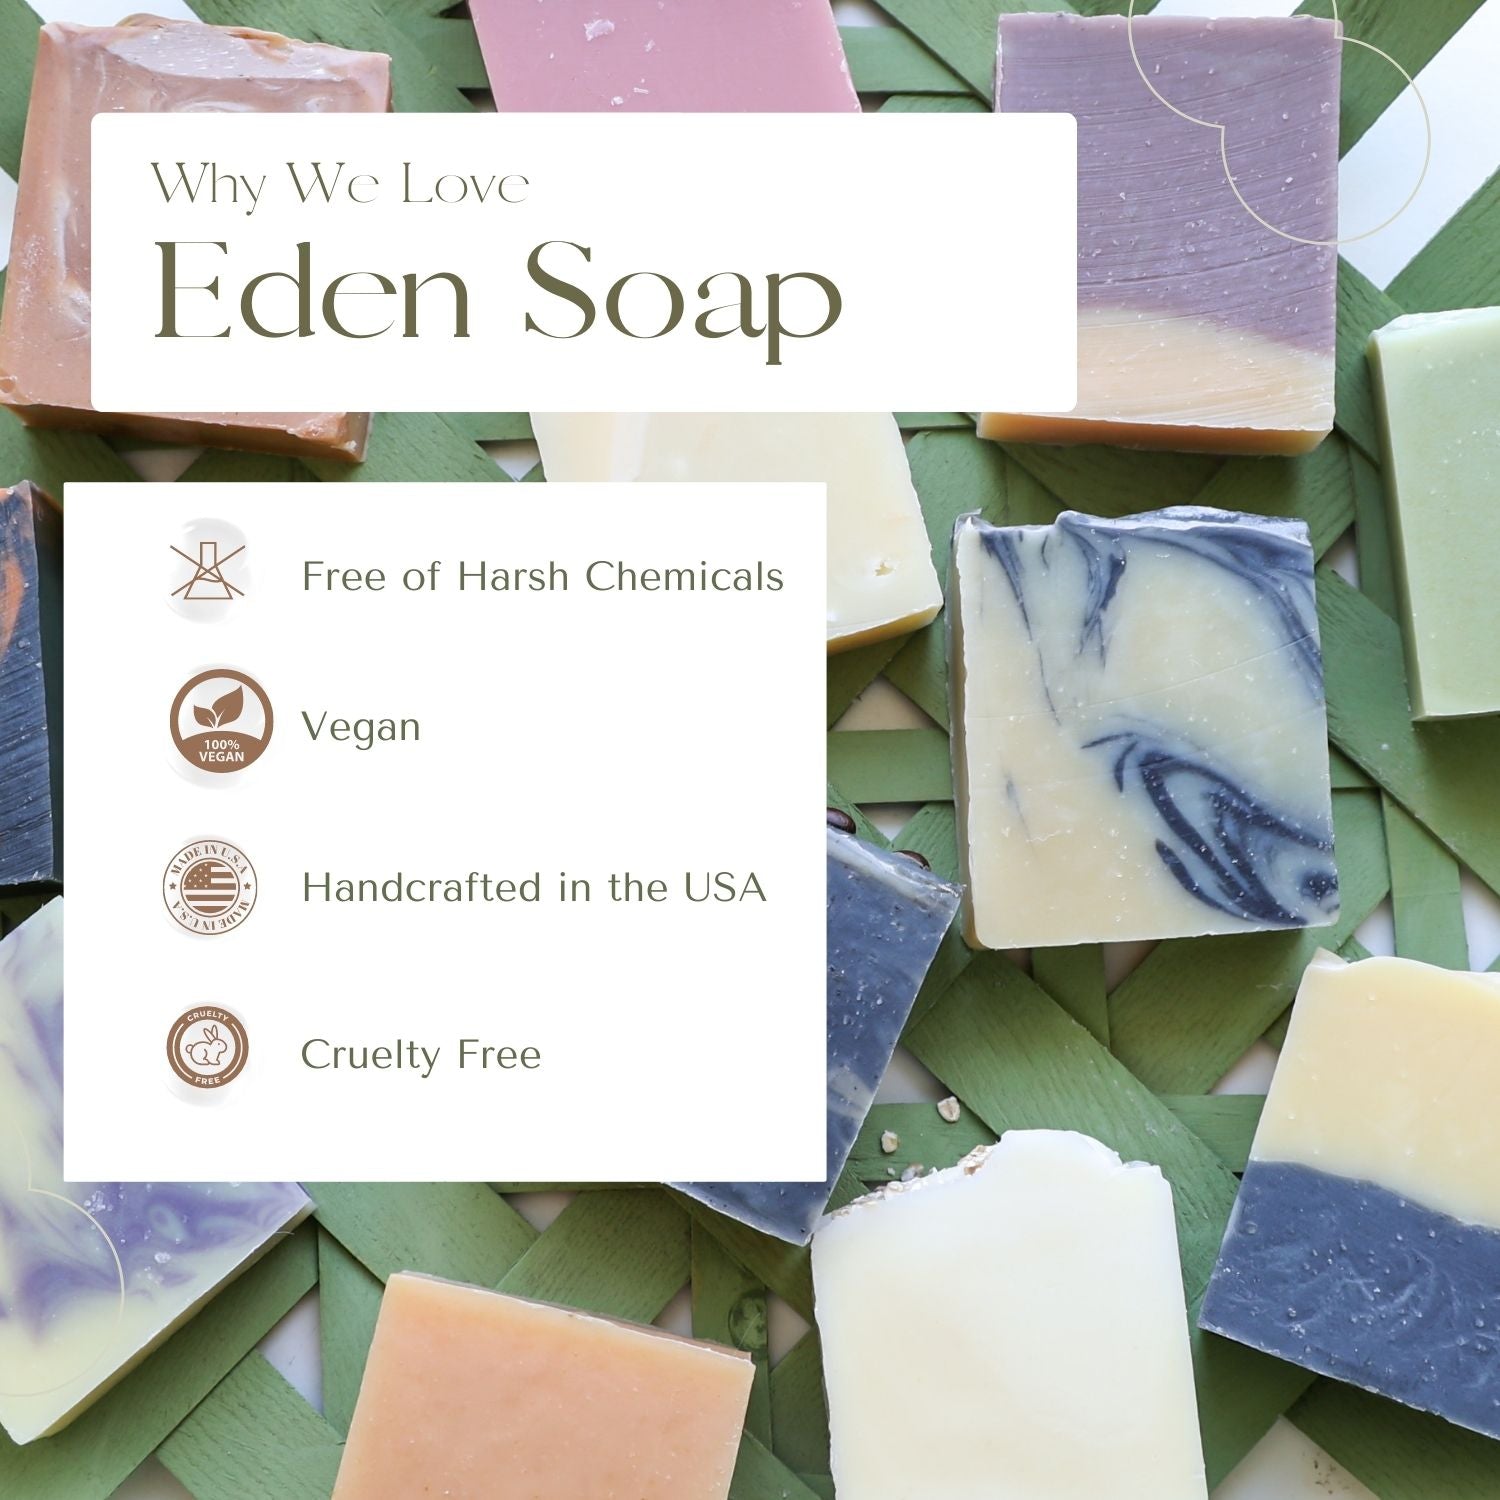 End Zone soap with Pine Tar & Clay– Cedarwood Soap